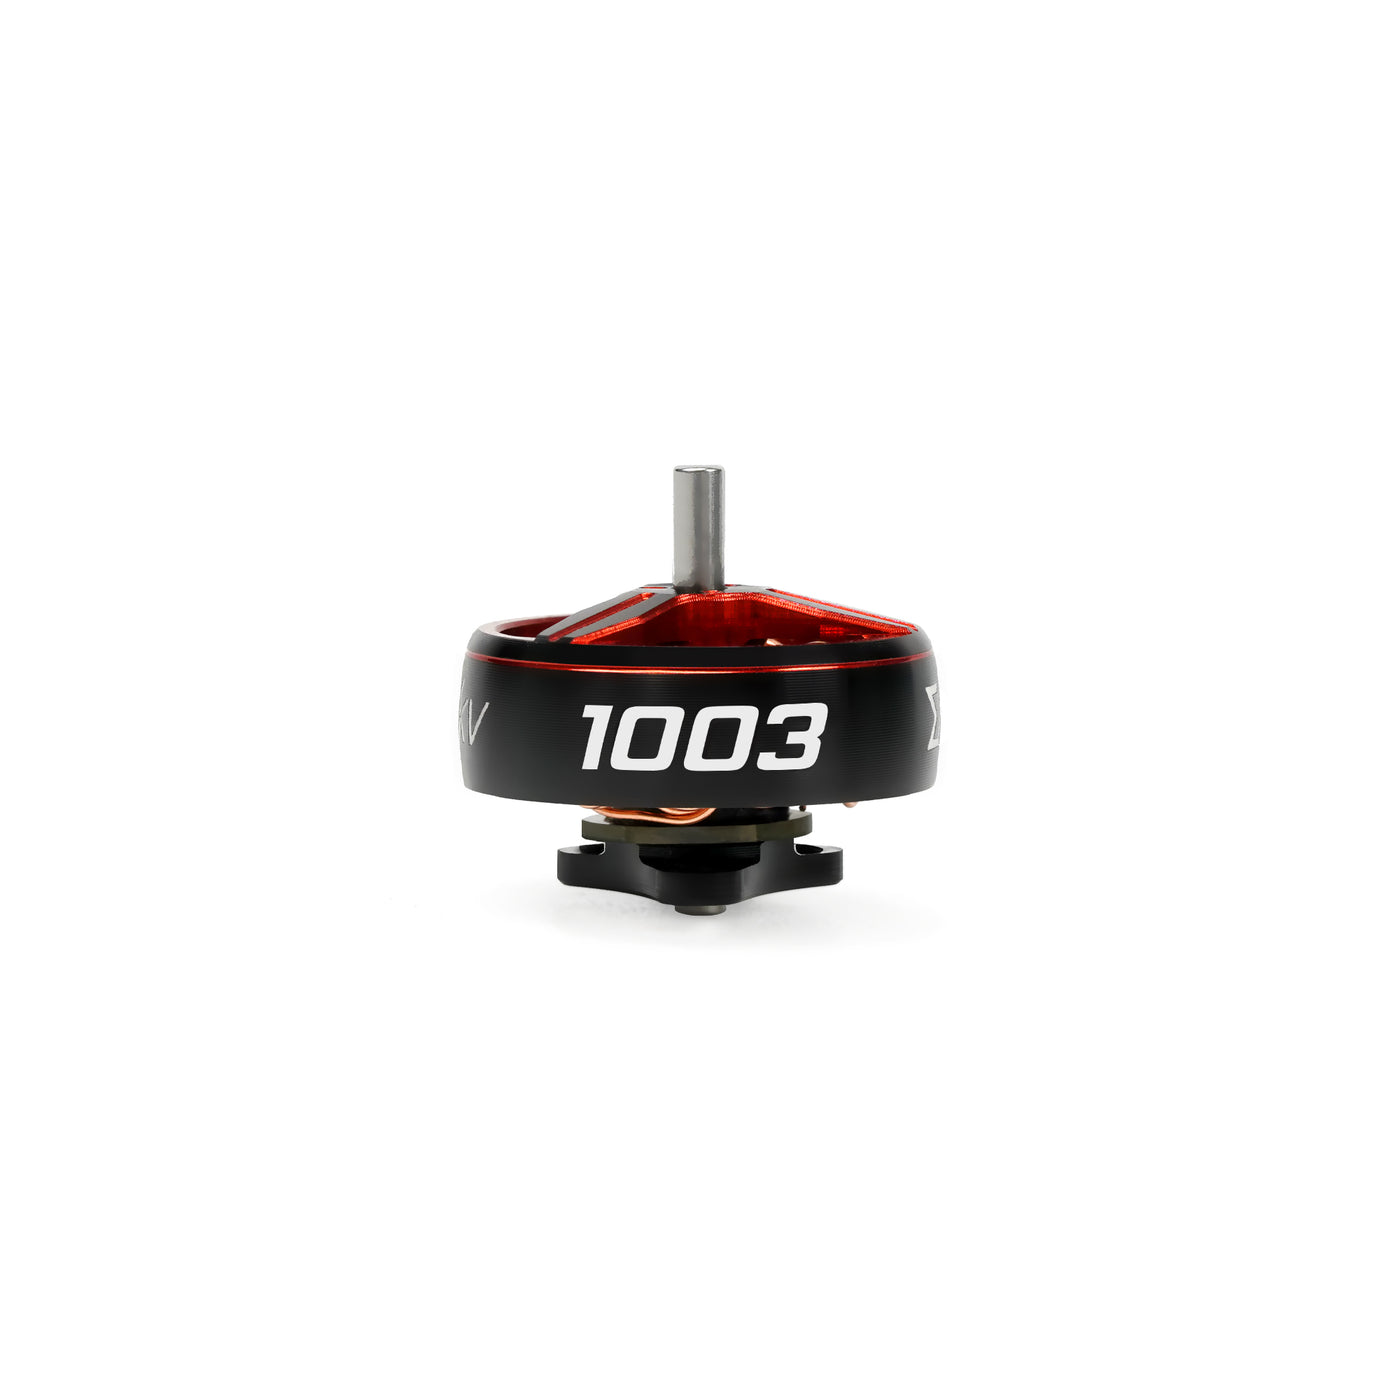 Sub250 1003 Motor 1.5mm Shaft  for 1.6 -2 inches Mini FPV drones